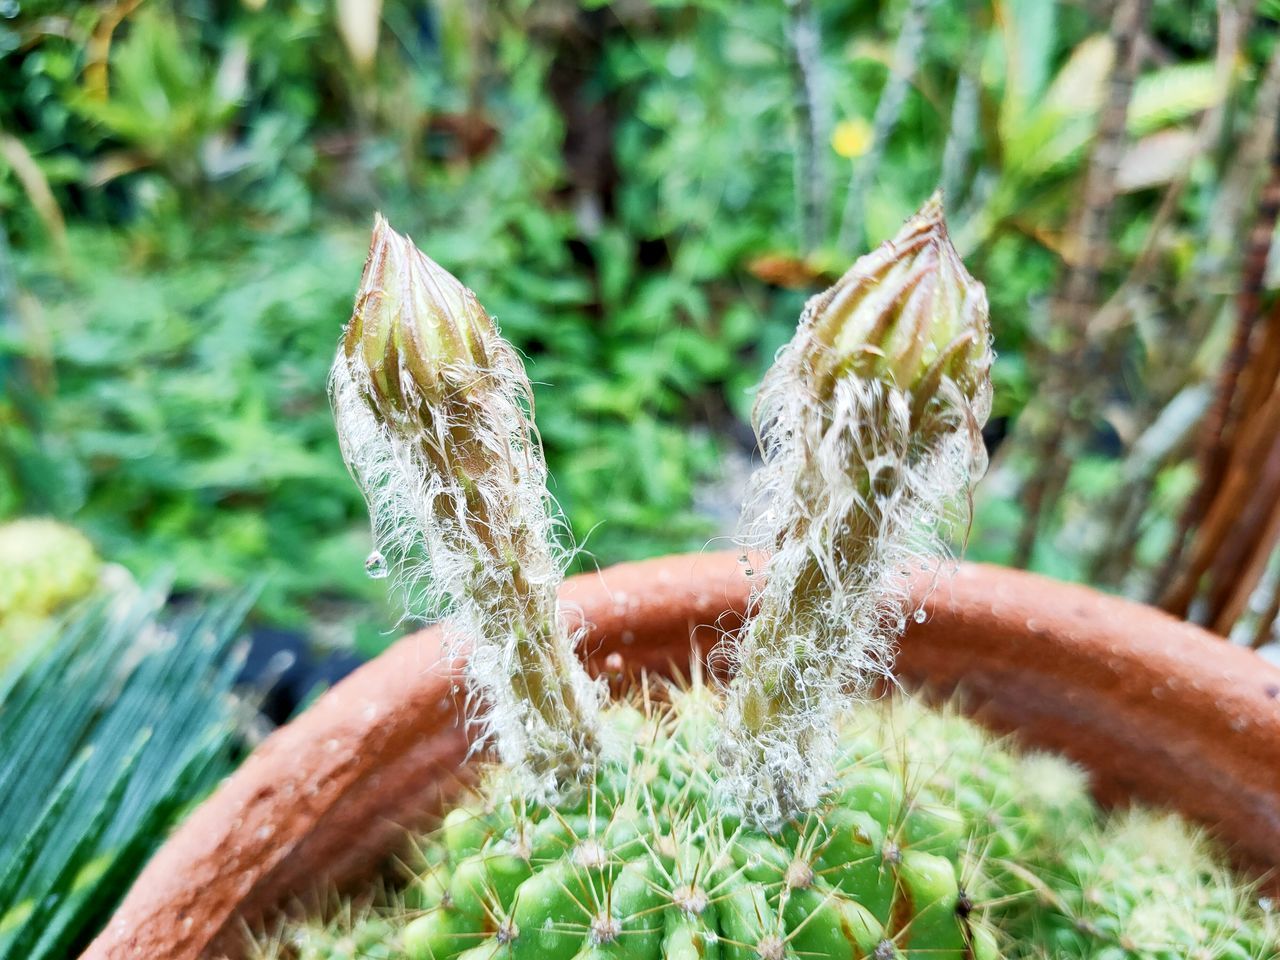 CLOSE-UP OF CACTUS PLANT IN WATER